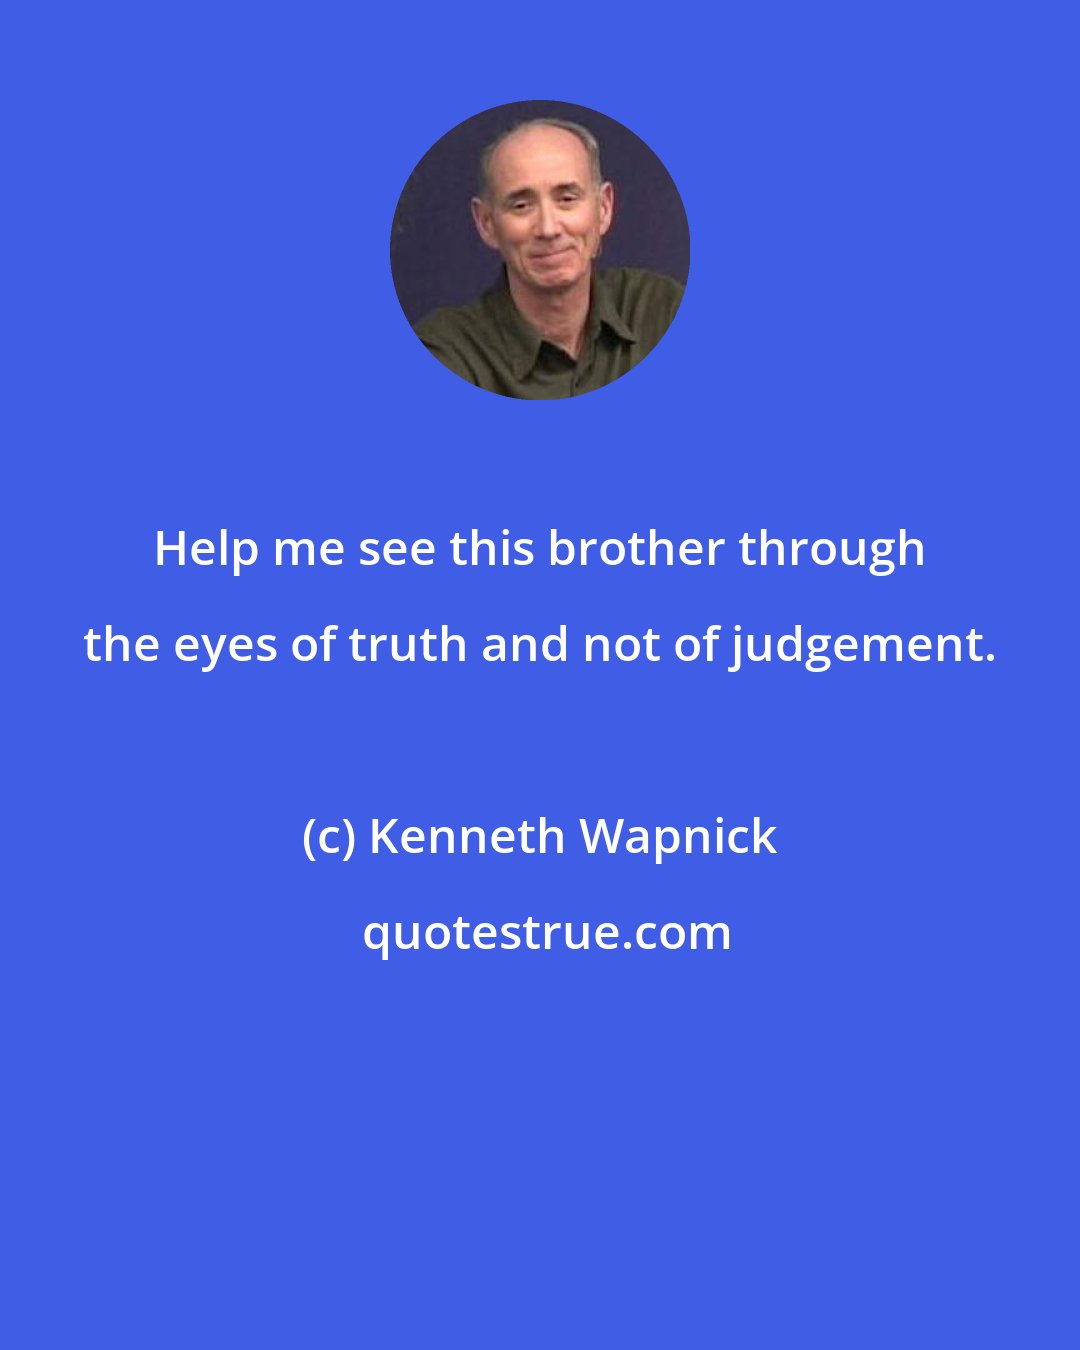 Kenneth Wapnick: Help me see this brother through the eyes of truth and not of judgement.